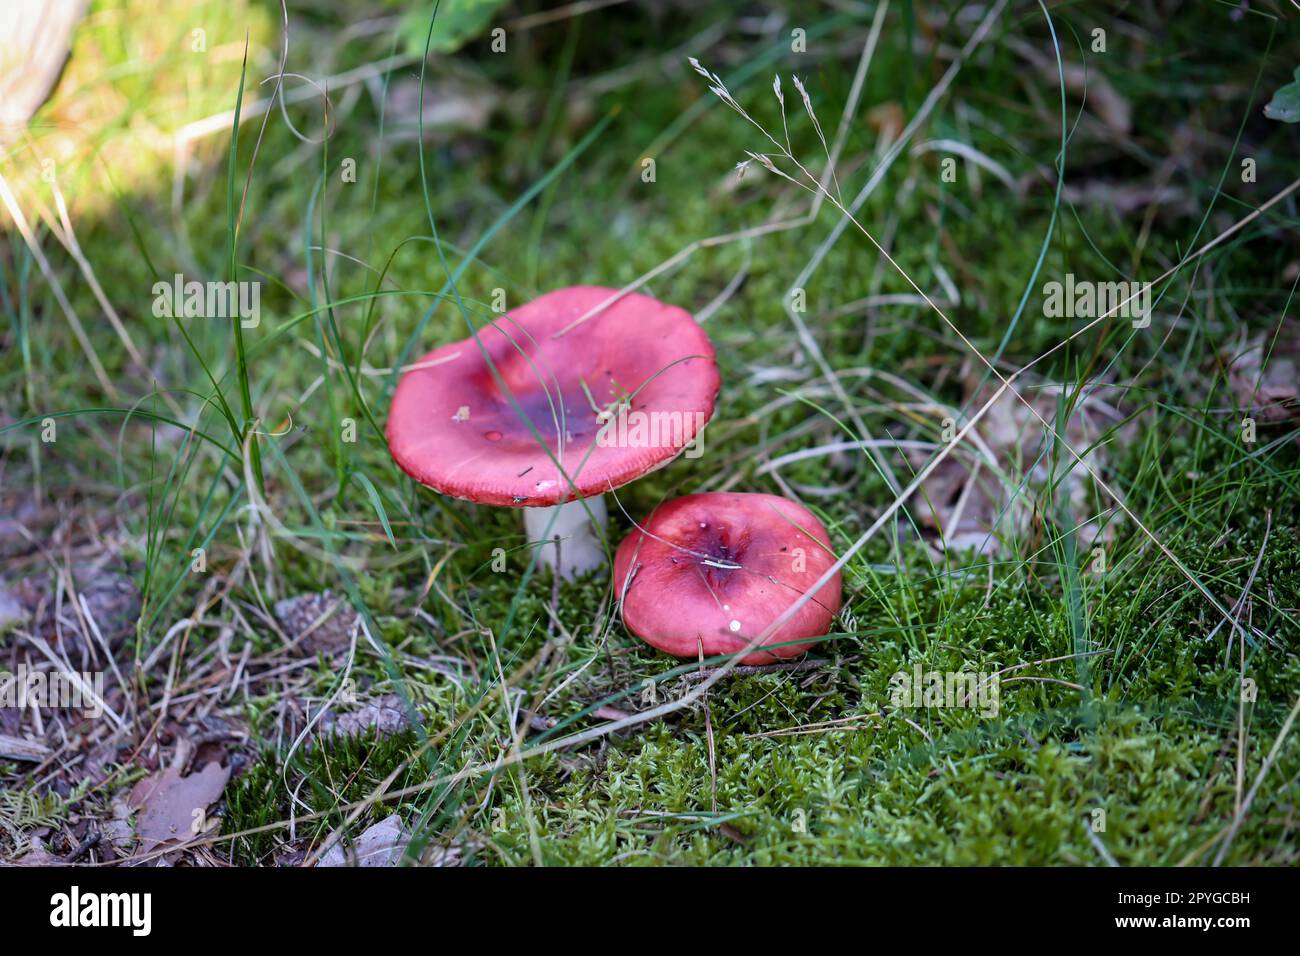 A mushroom well hidden and camouflaged between moss and grass. Stock Photo